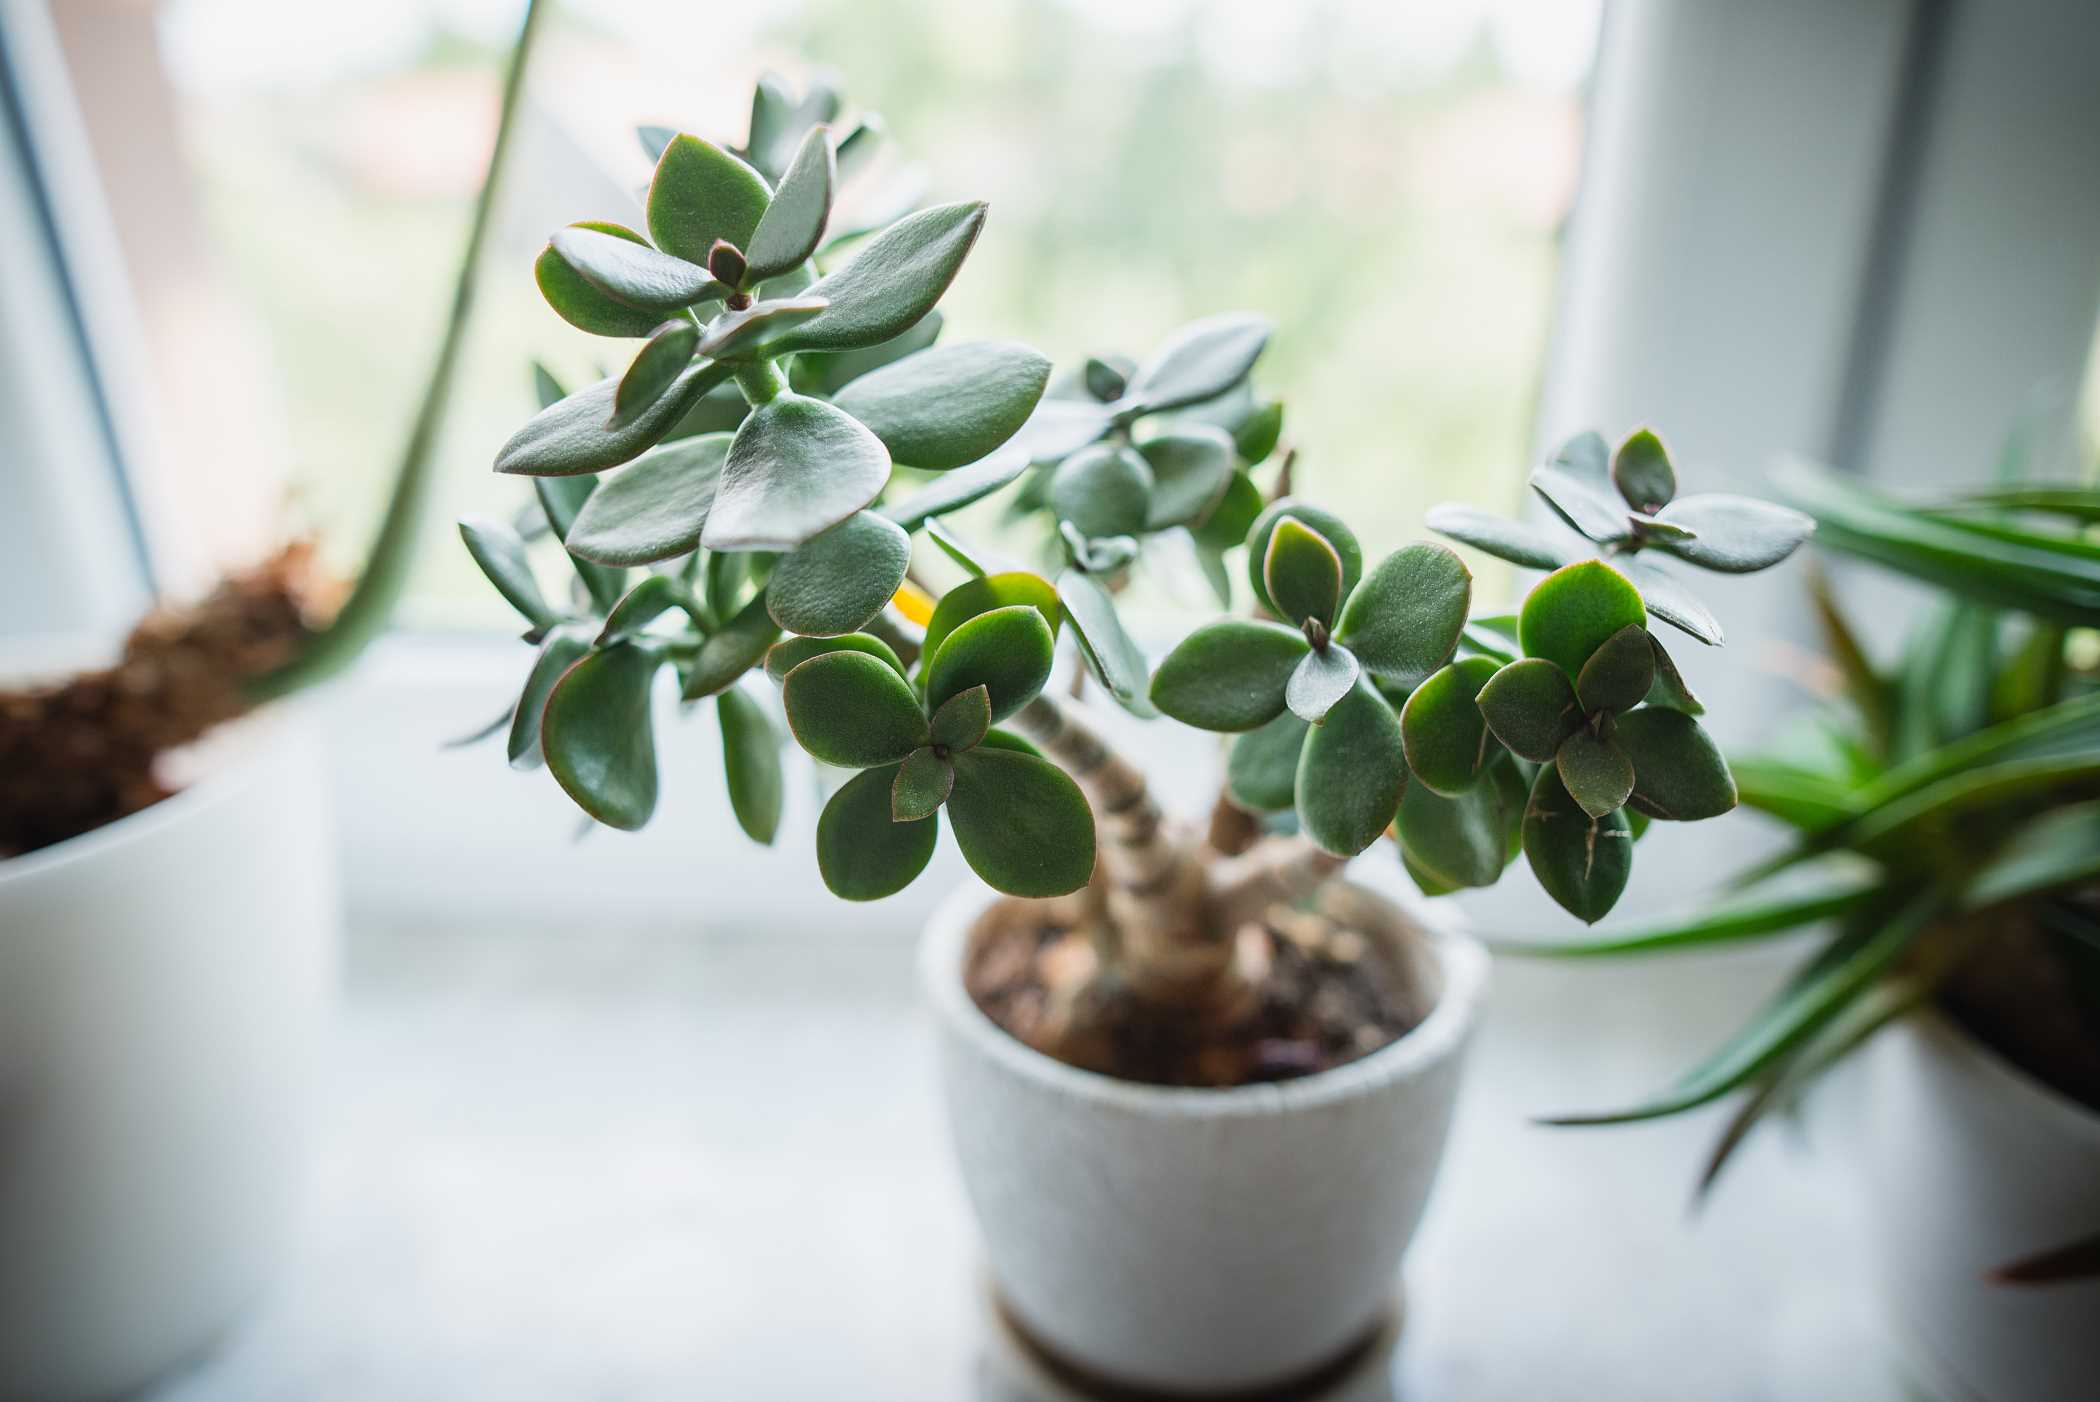 Lucky Tree - Discover How to Care for a Jade Plant